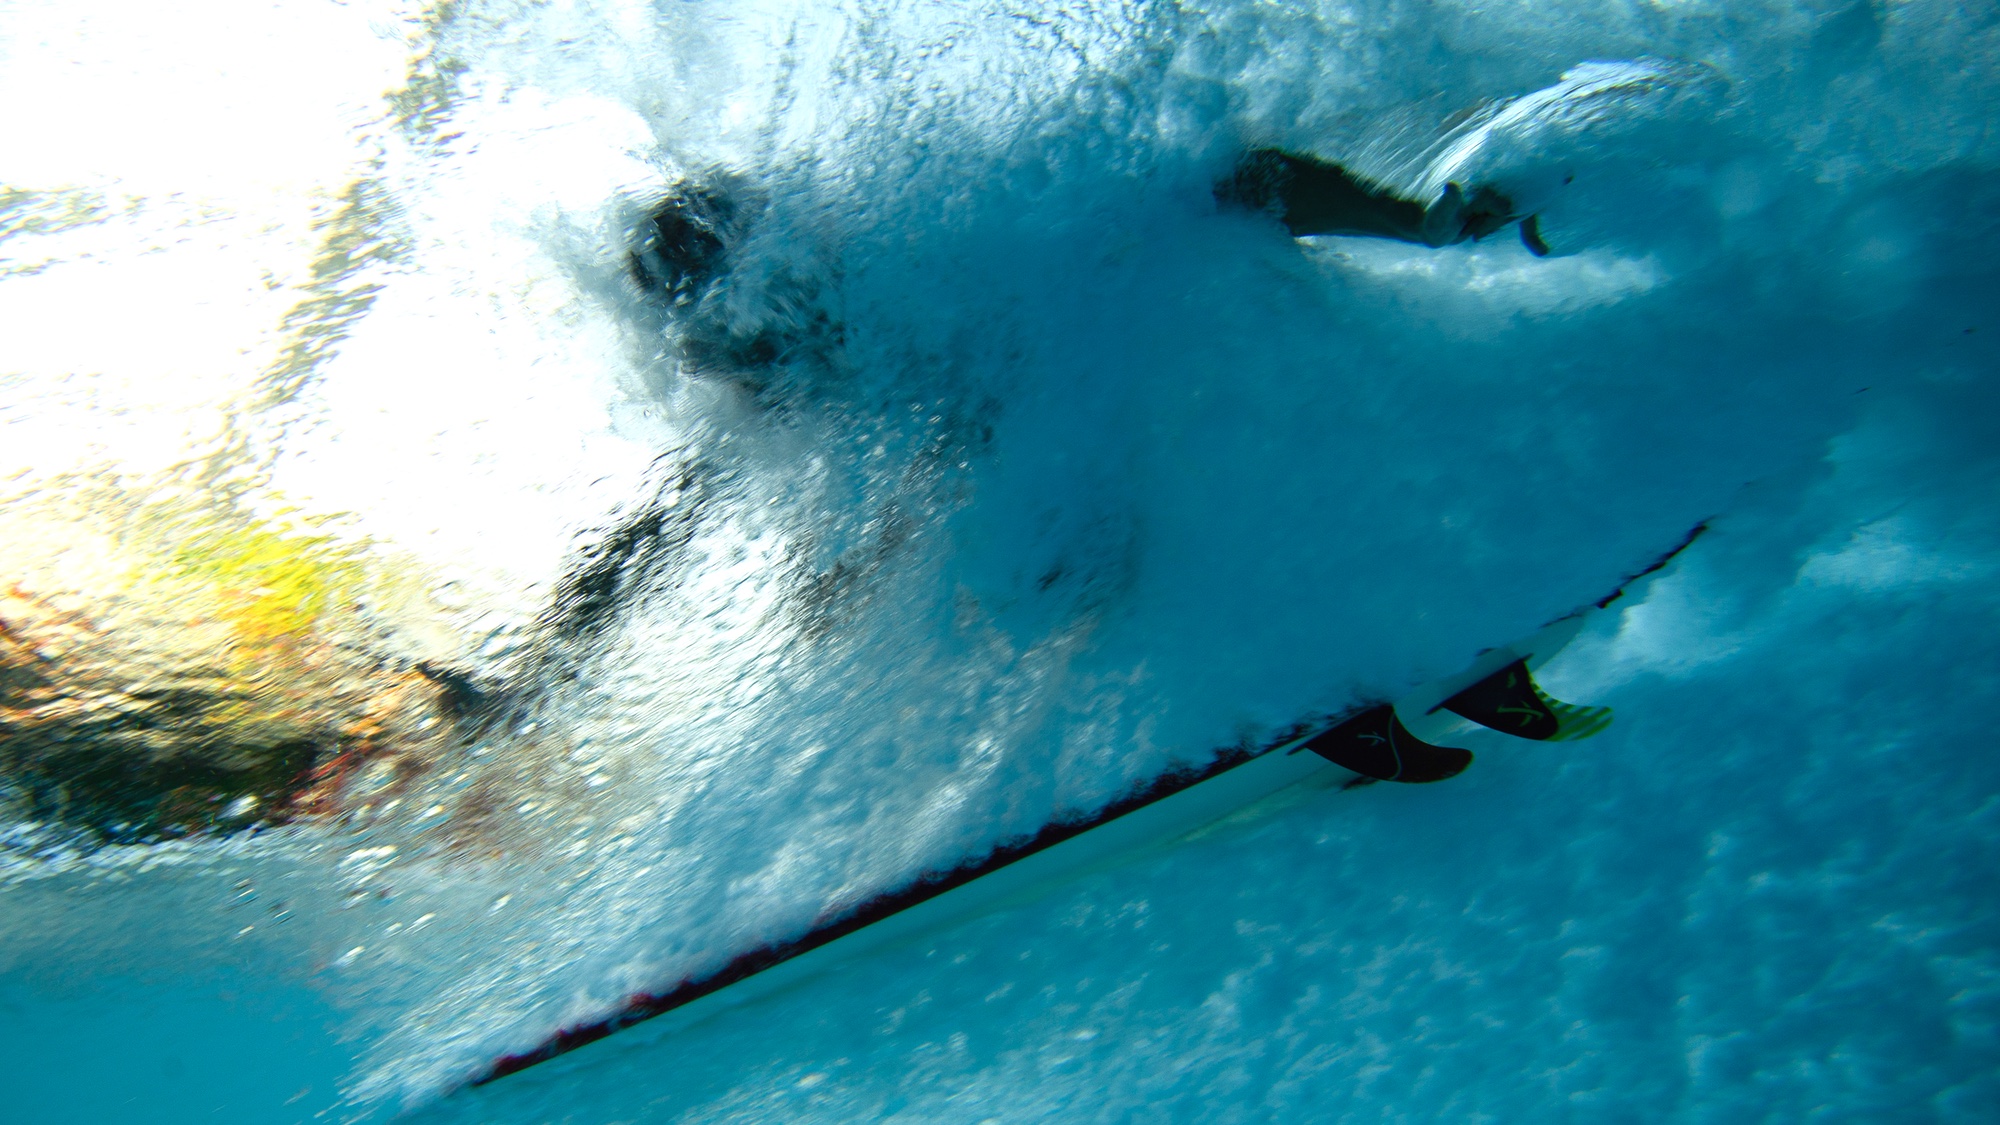 surfer as seen from underwater